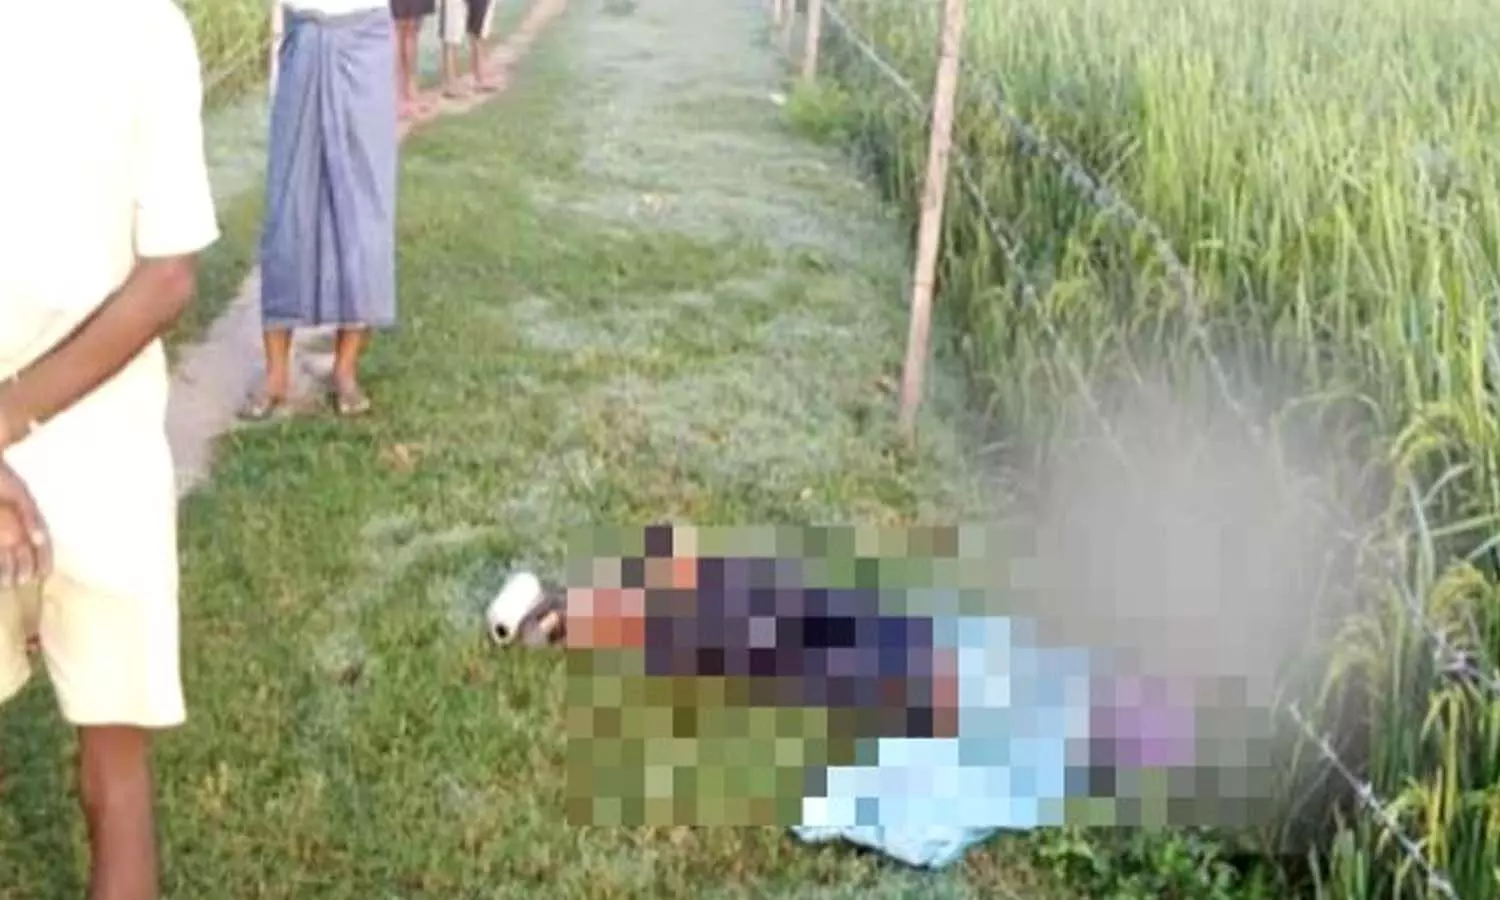 To save the crop from the cows, the young man died by clinging to the electric wire on the side of the field.